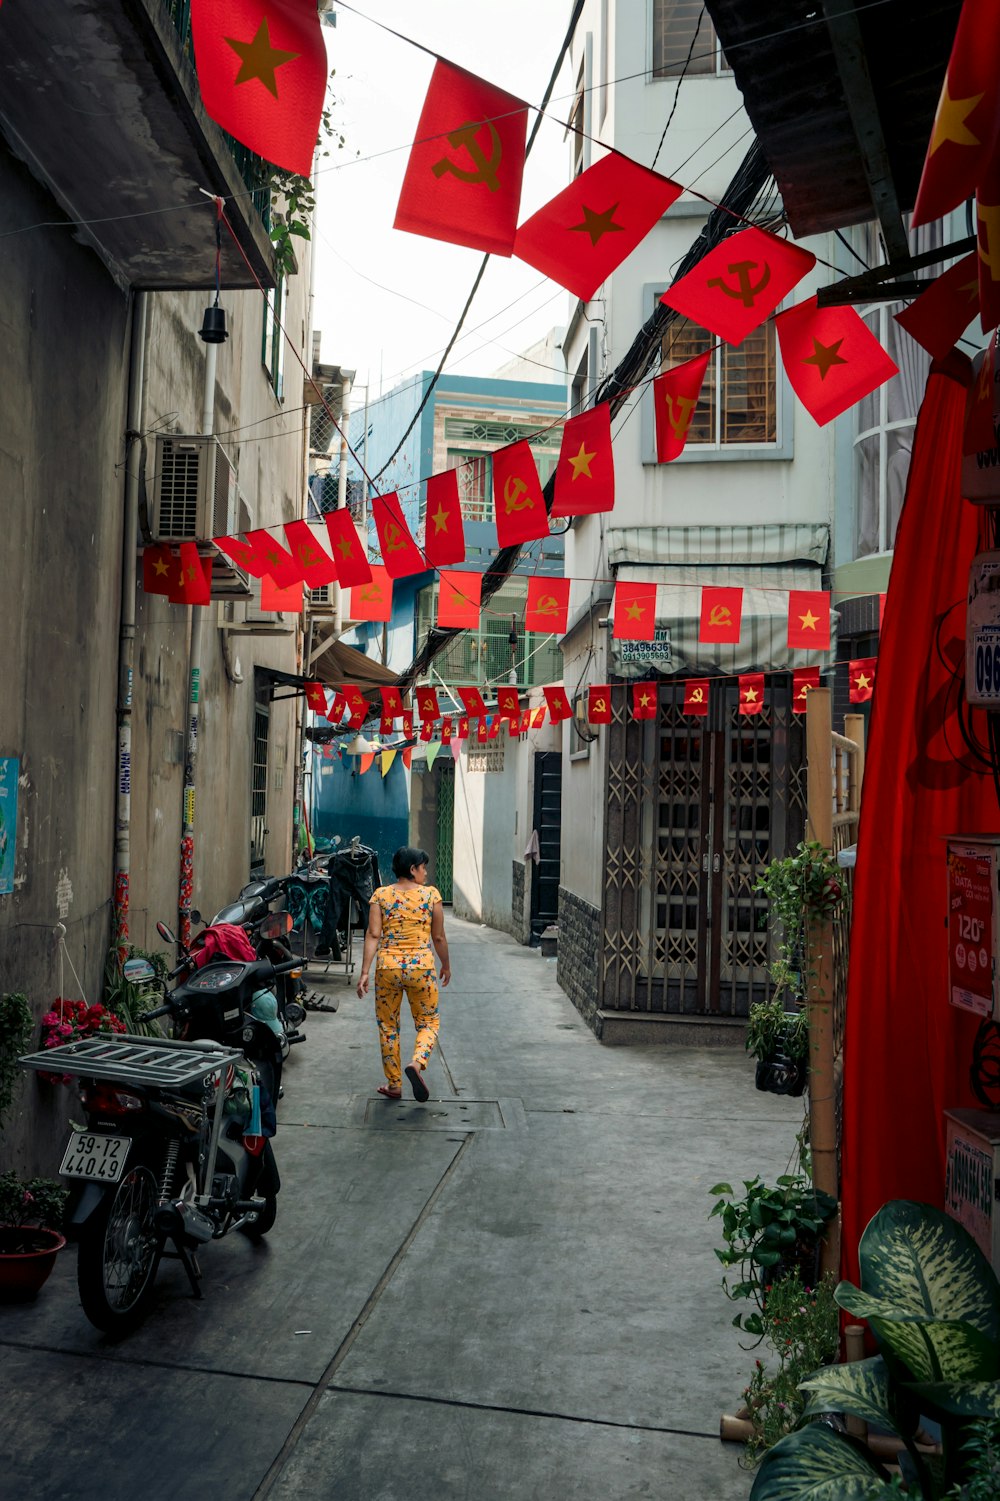 a person walking down a street with red flags